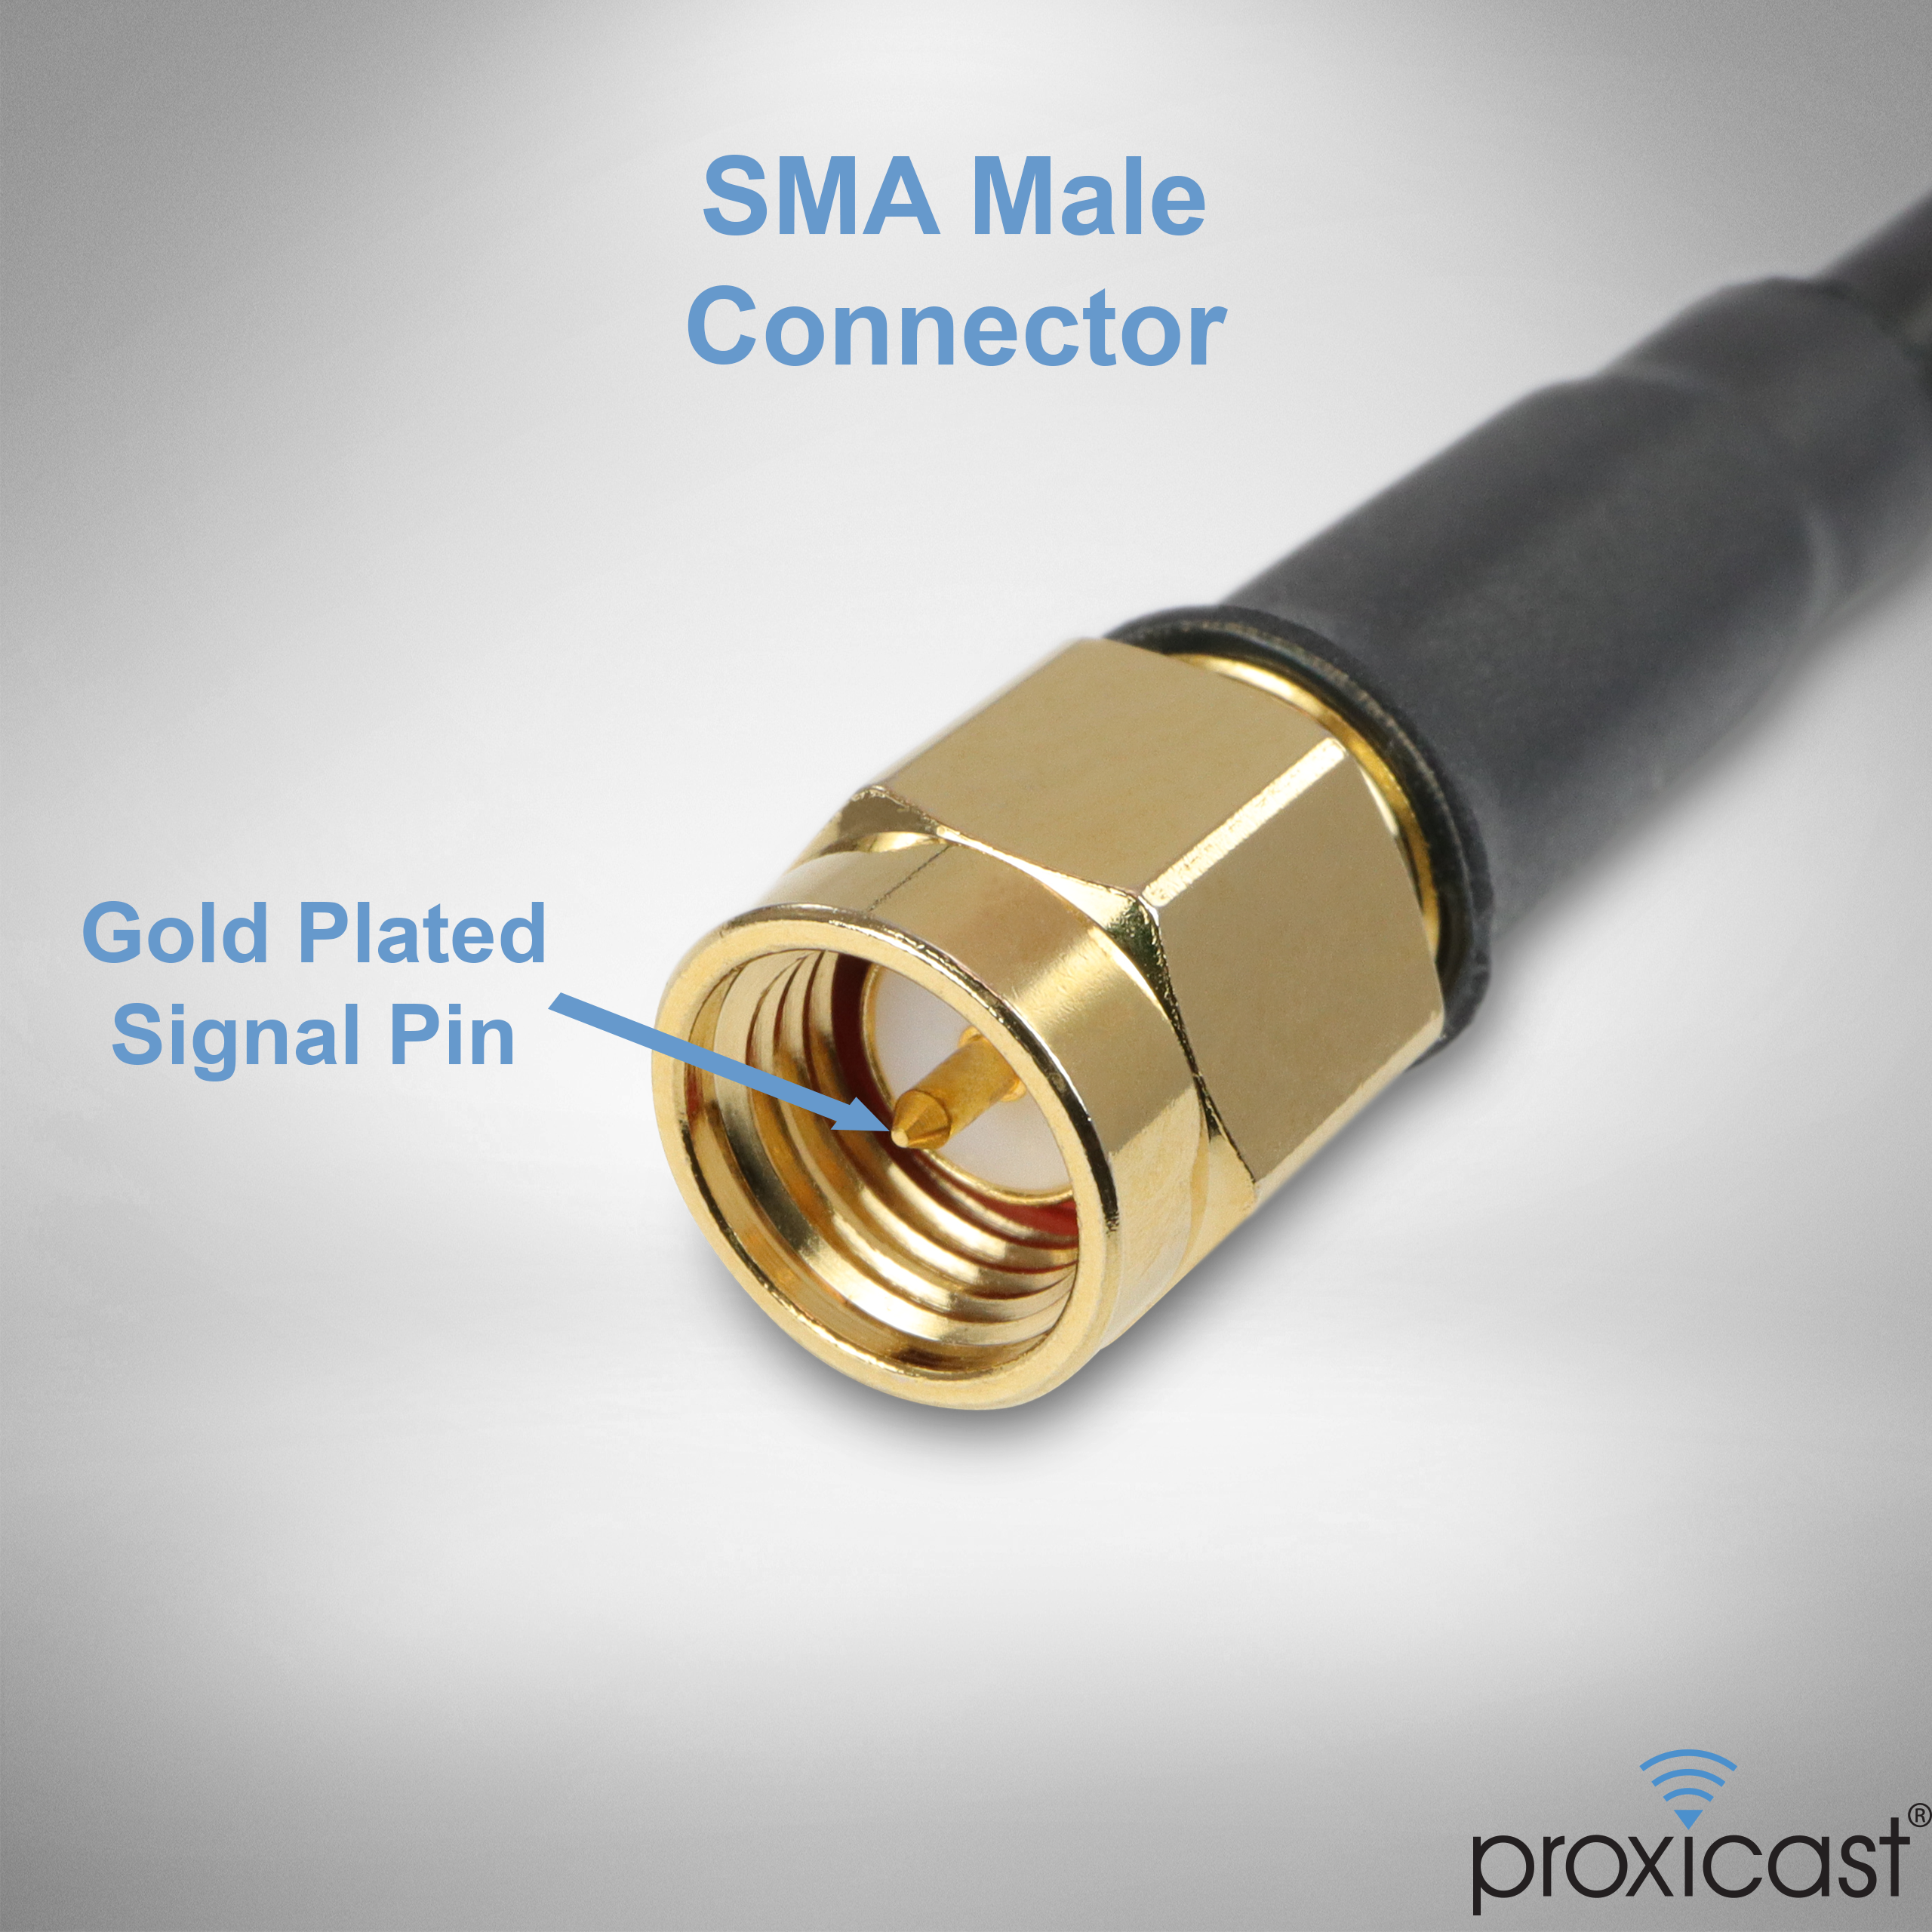 Not for TV SMA Male to SMA Female Connector Antenna Lead Extender for 3G/4G/5G/LTE/ADS-B/Ham/GPS/WiFi/RF Radio Use 50 Ohm 10 ft Low-Loss Coaxial Extension Cable GEMEK Pure Copper Coax Cables 